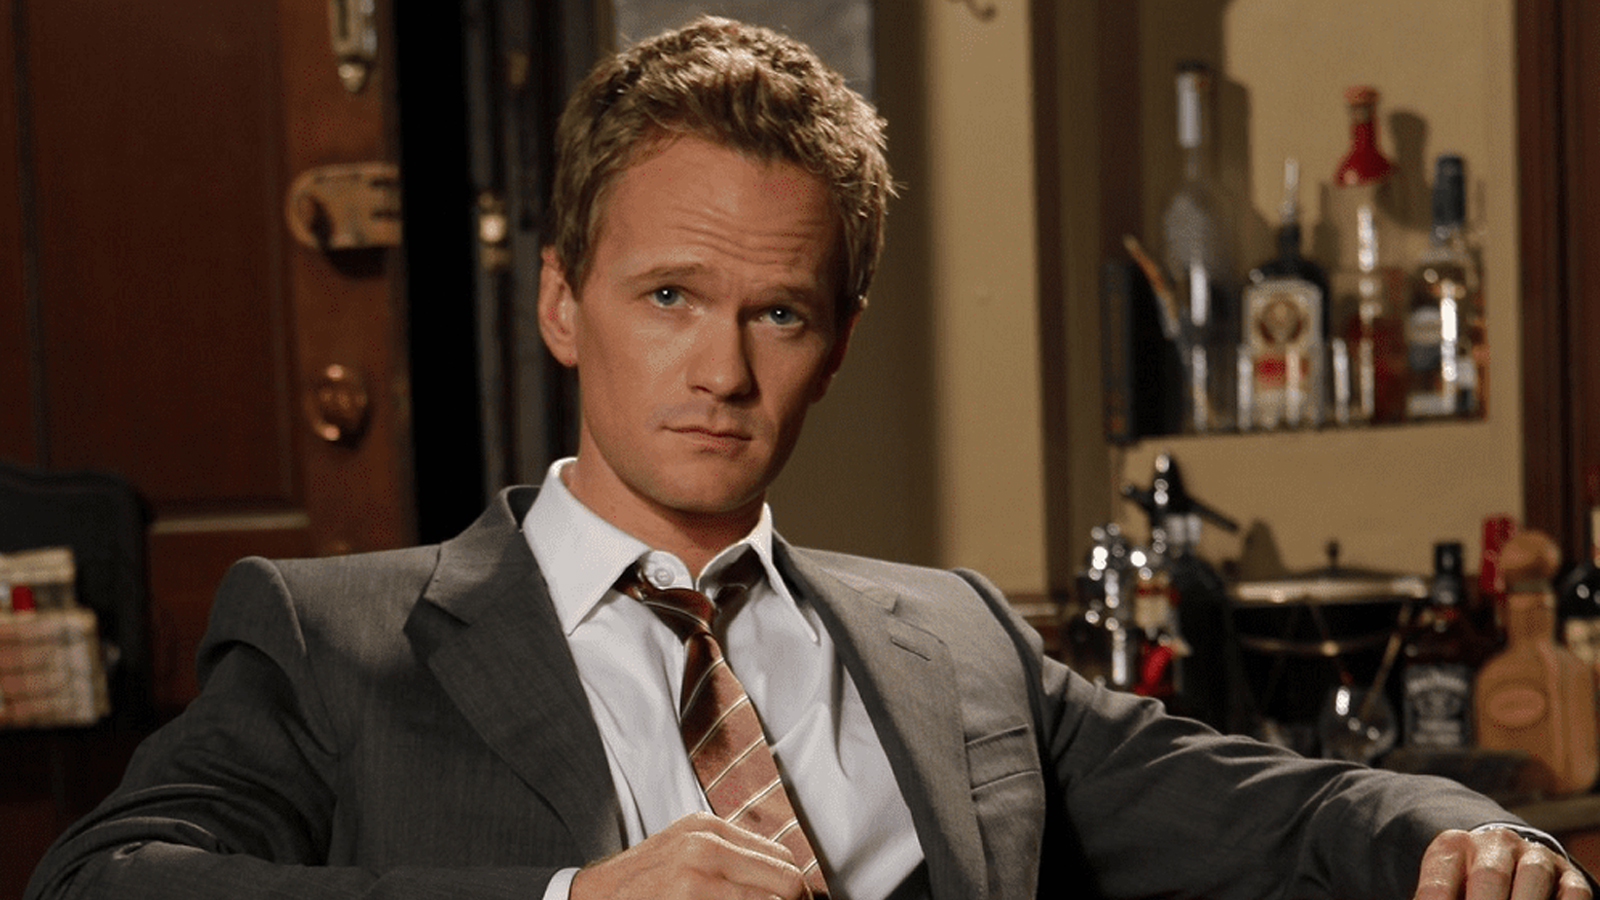 We Might Never See A Character Like Barney Stinson Again